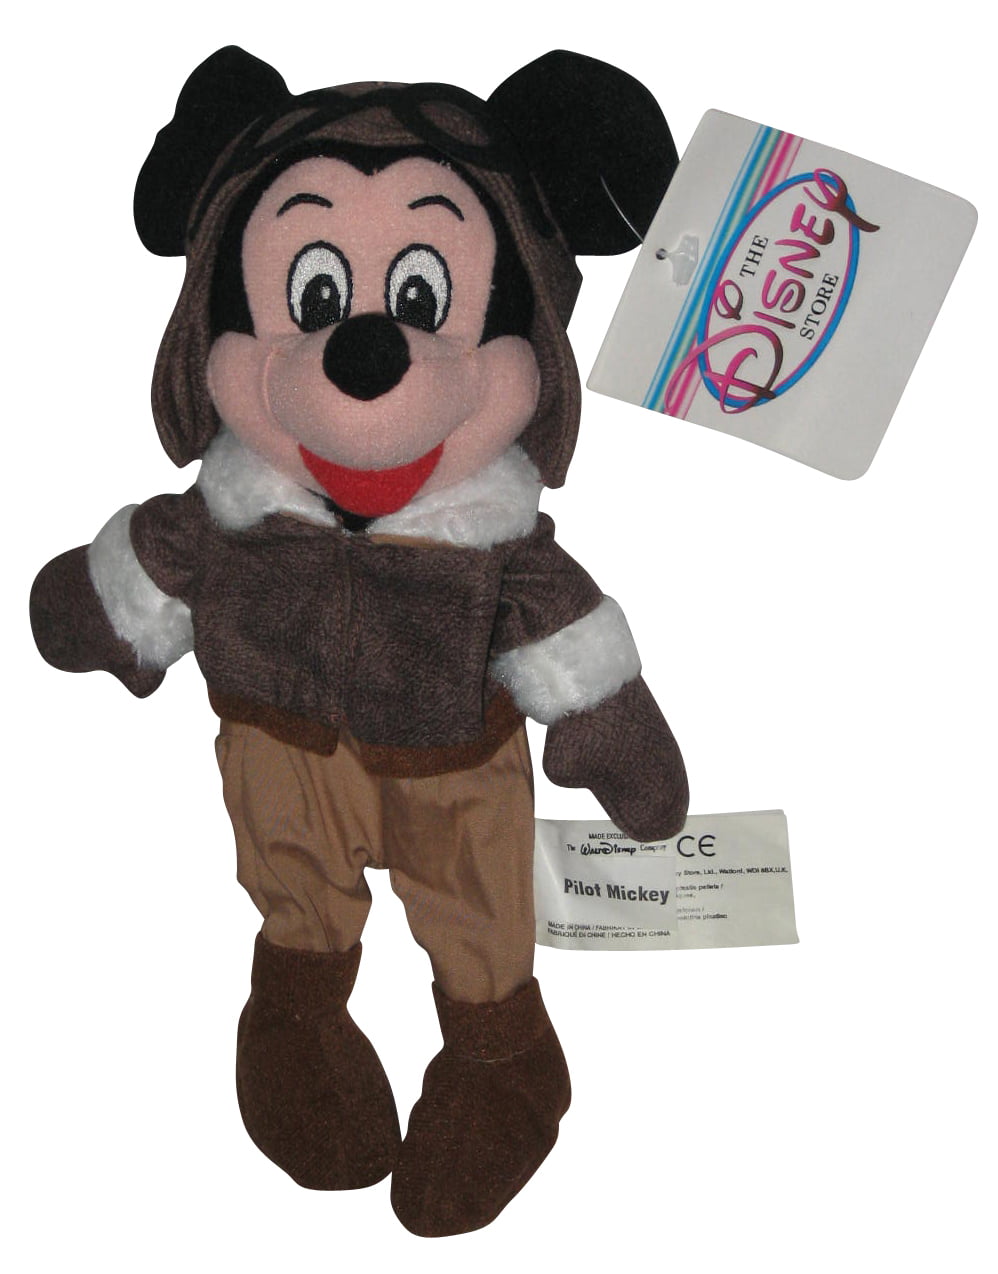 9.5 inch PILOT MICKEY Disney Bean Bag Plush - Mint with Tag Mickey Mouse 